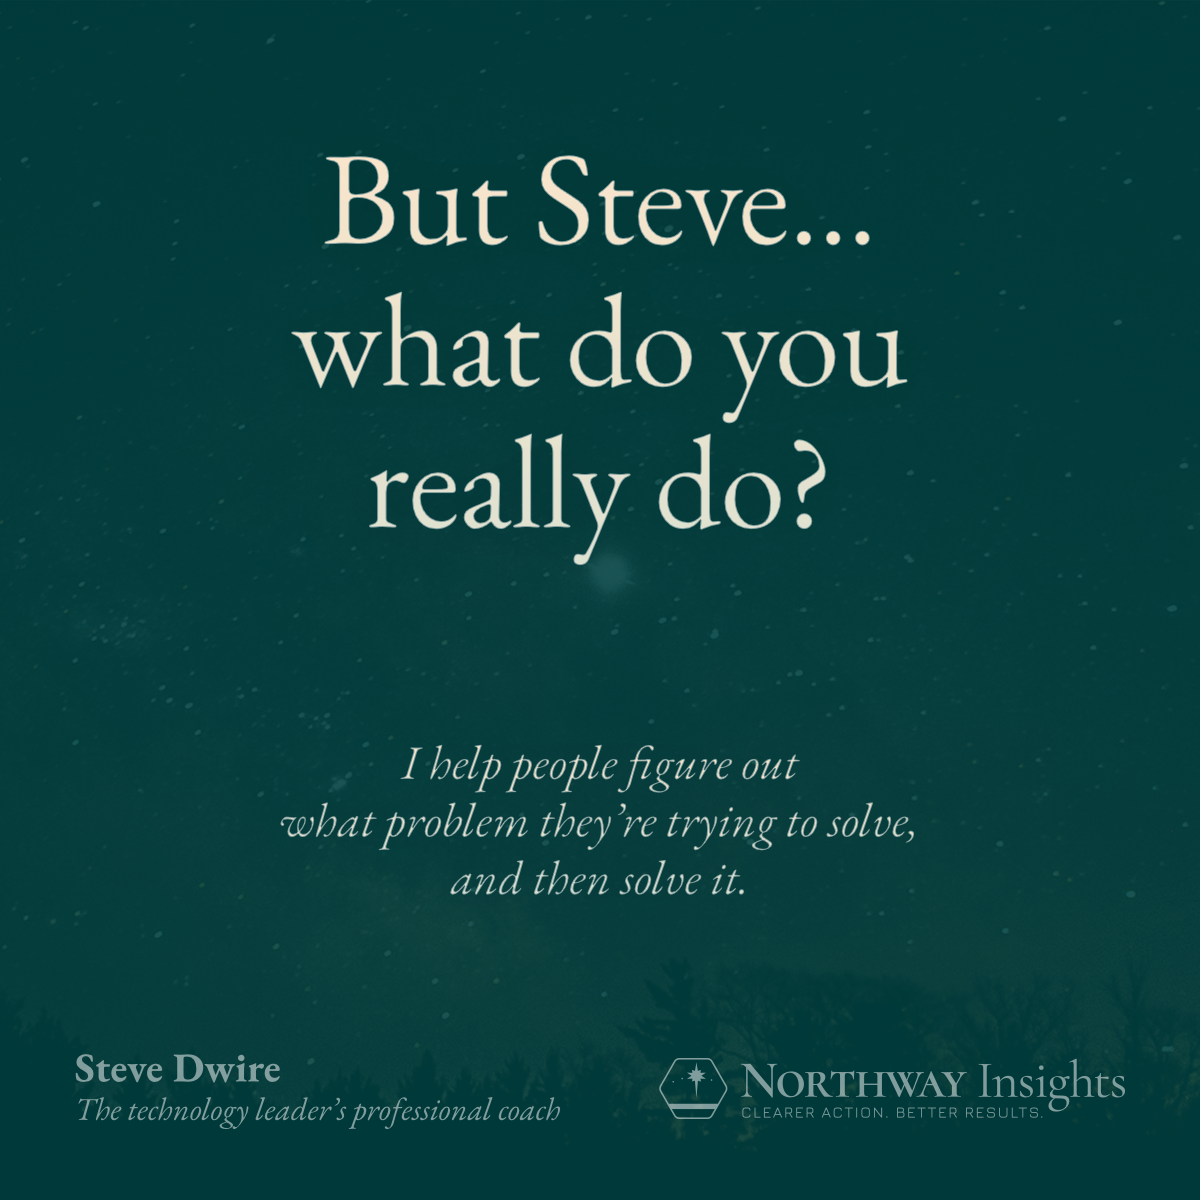 But Steve, what do you really do?